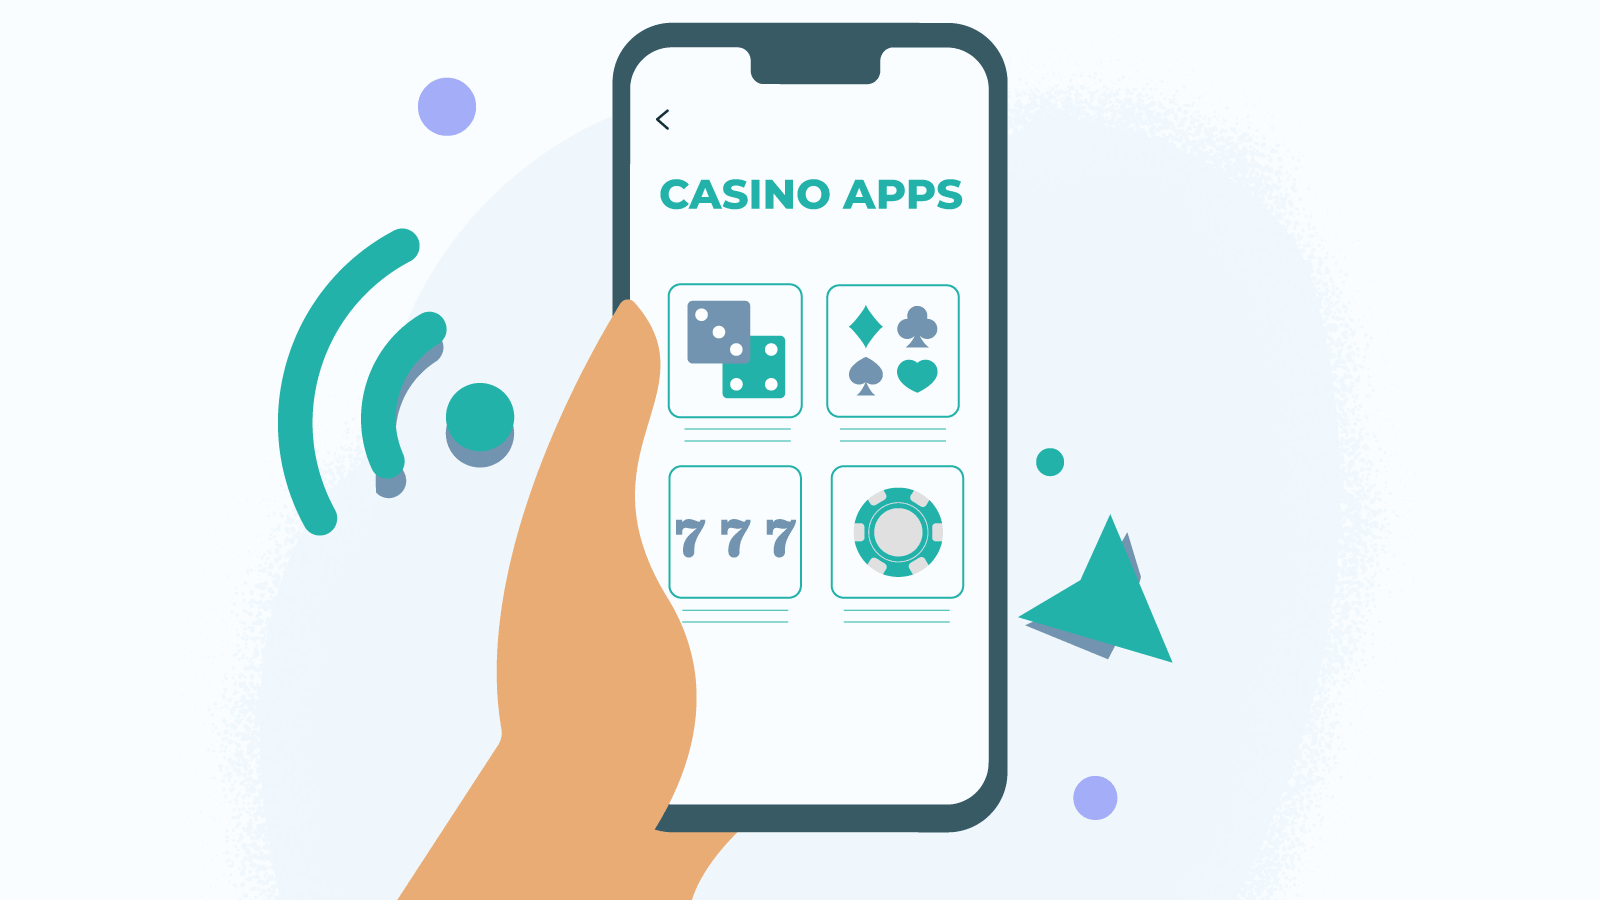 How to choose online casino apps